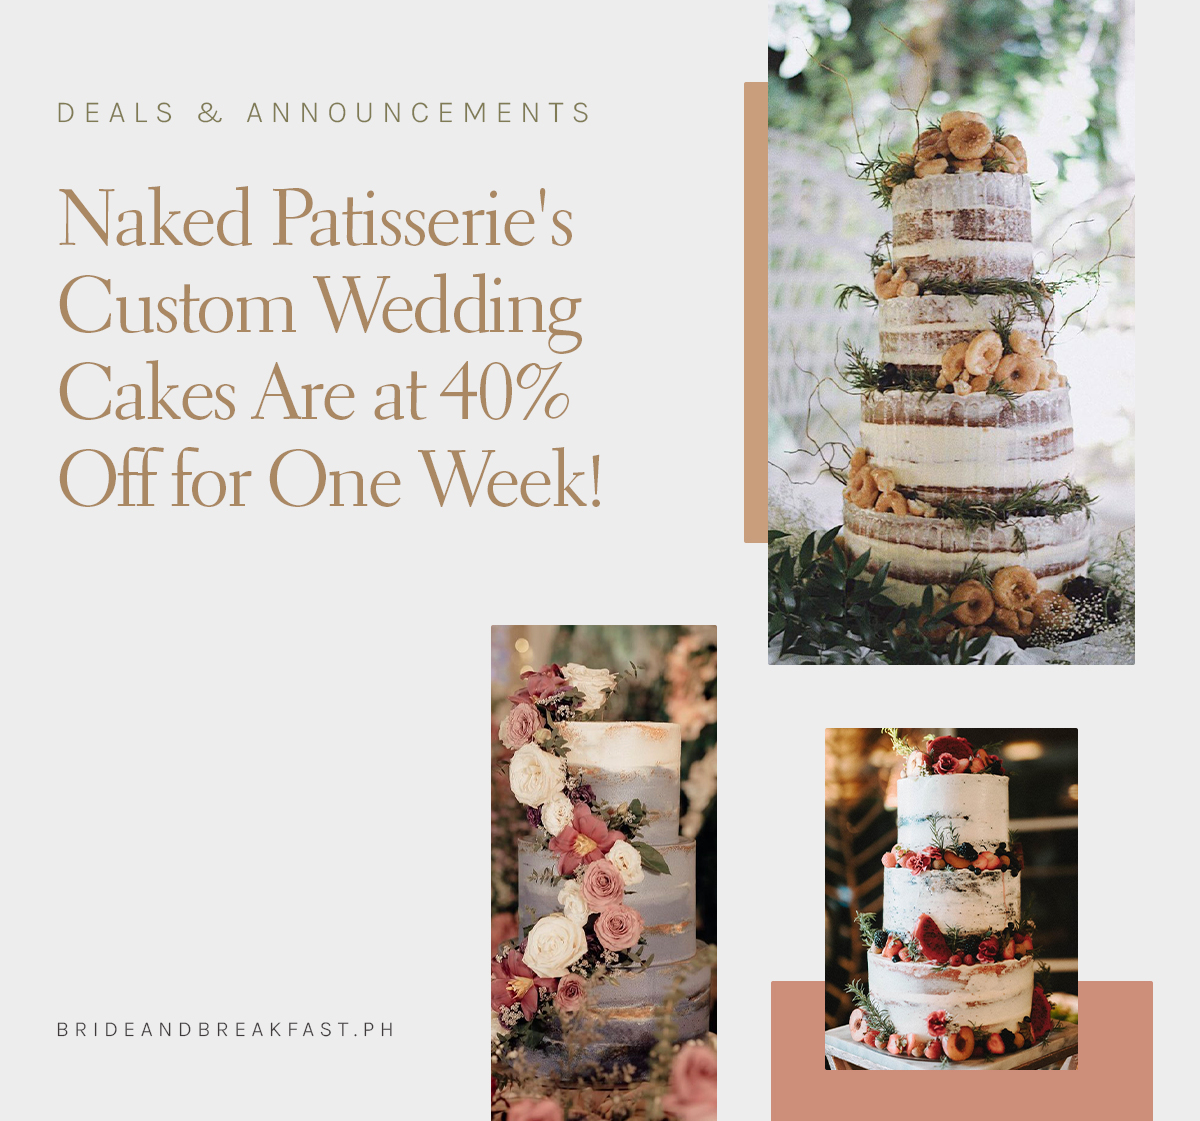 Naked Patisserie's Custom Wedding Cakes are at 40% Off for One Week!